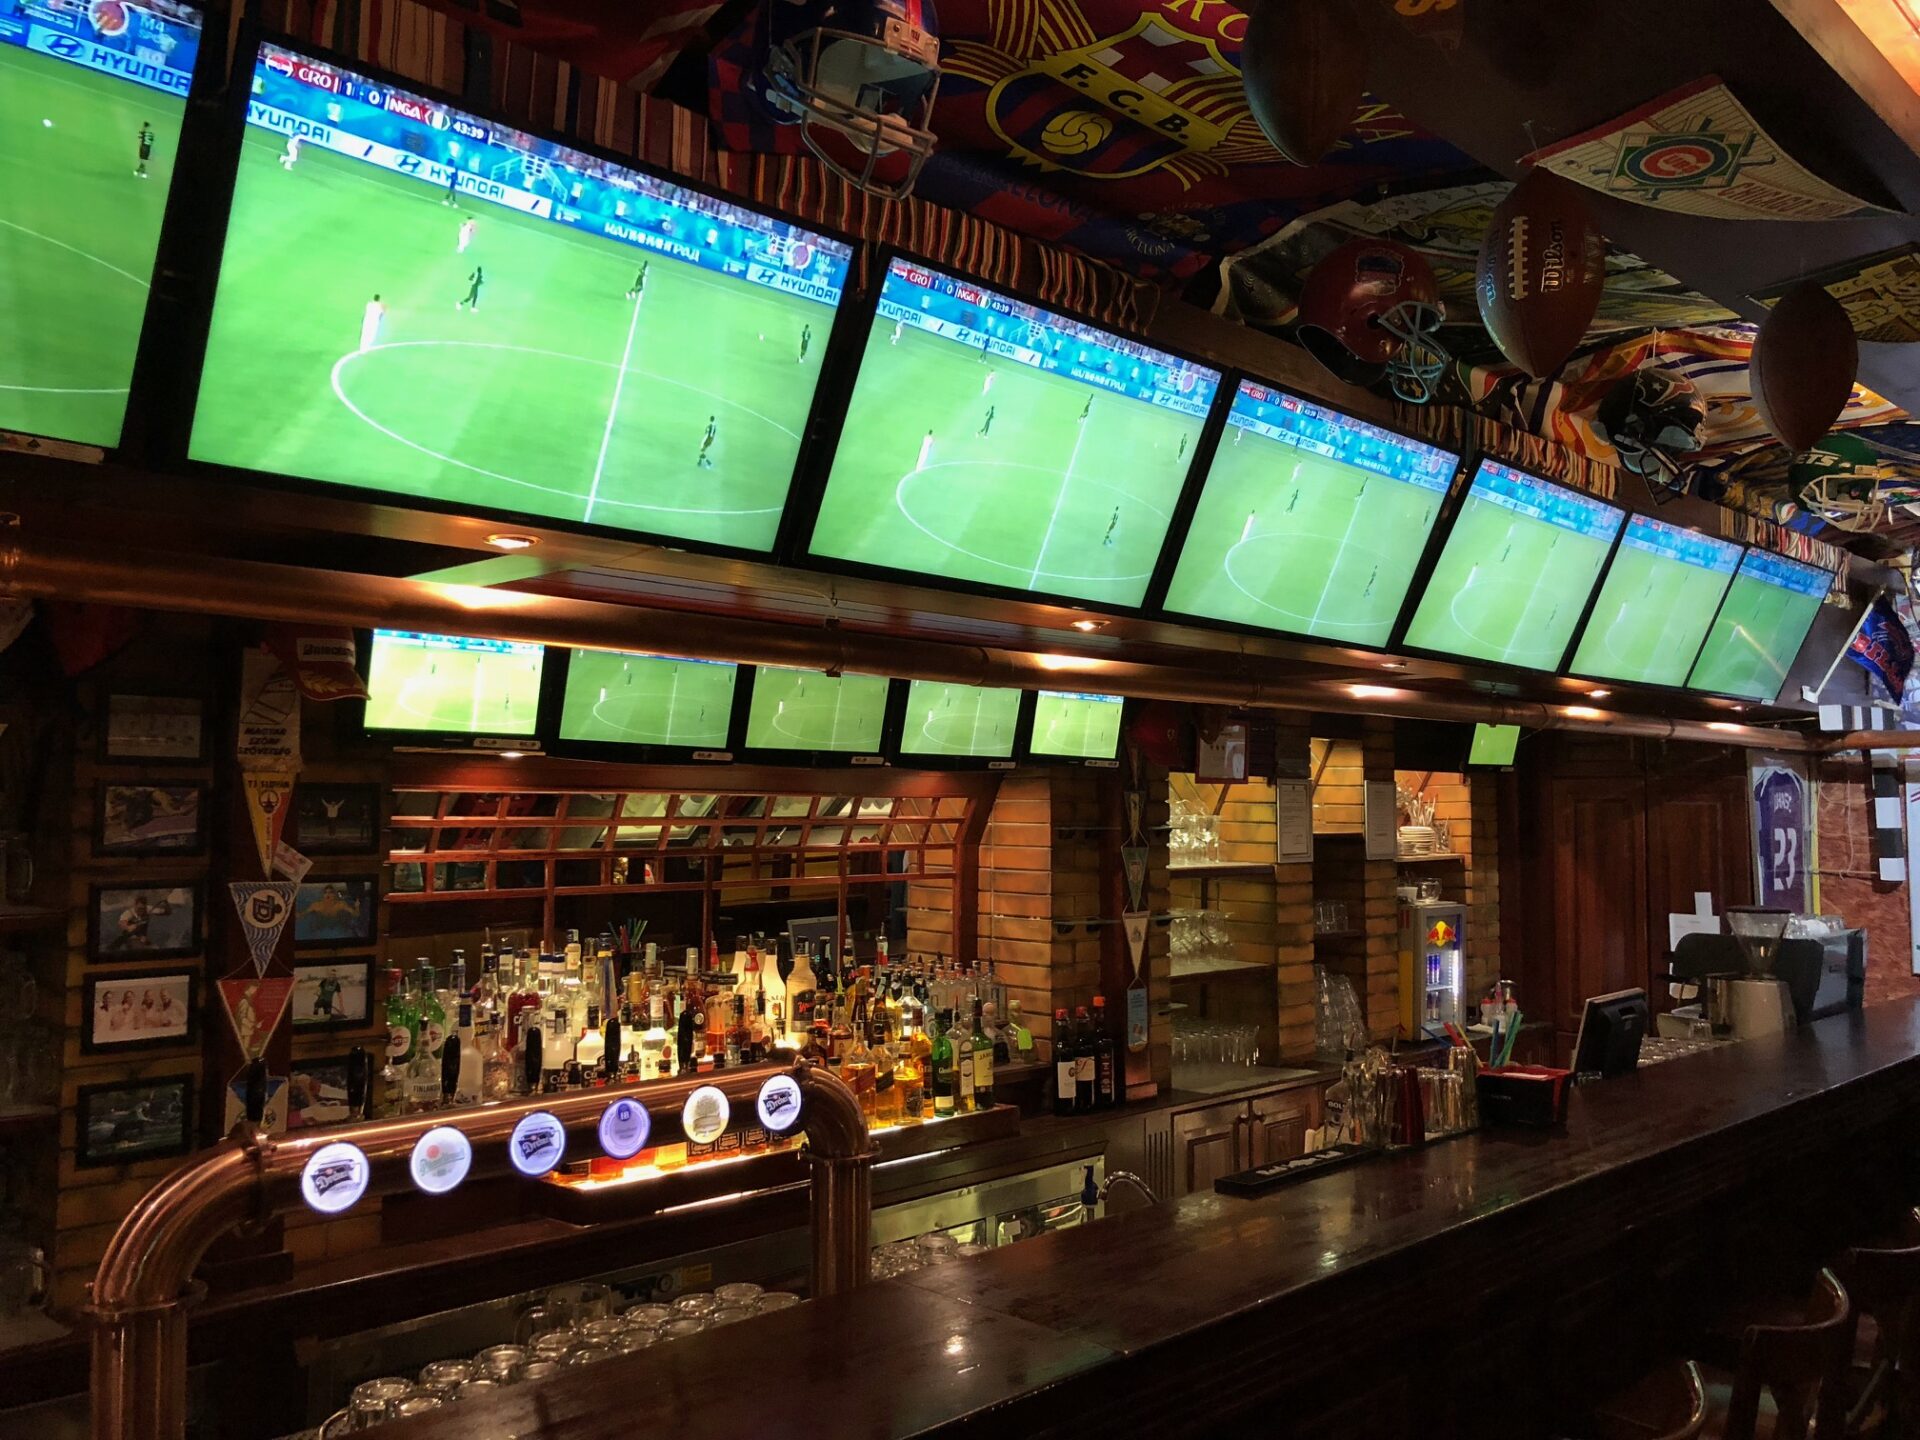 Missing any action in Champs is virtually impossible with over 40 TV screens